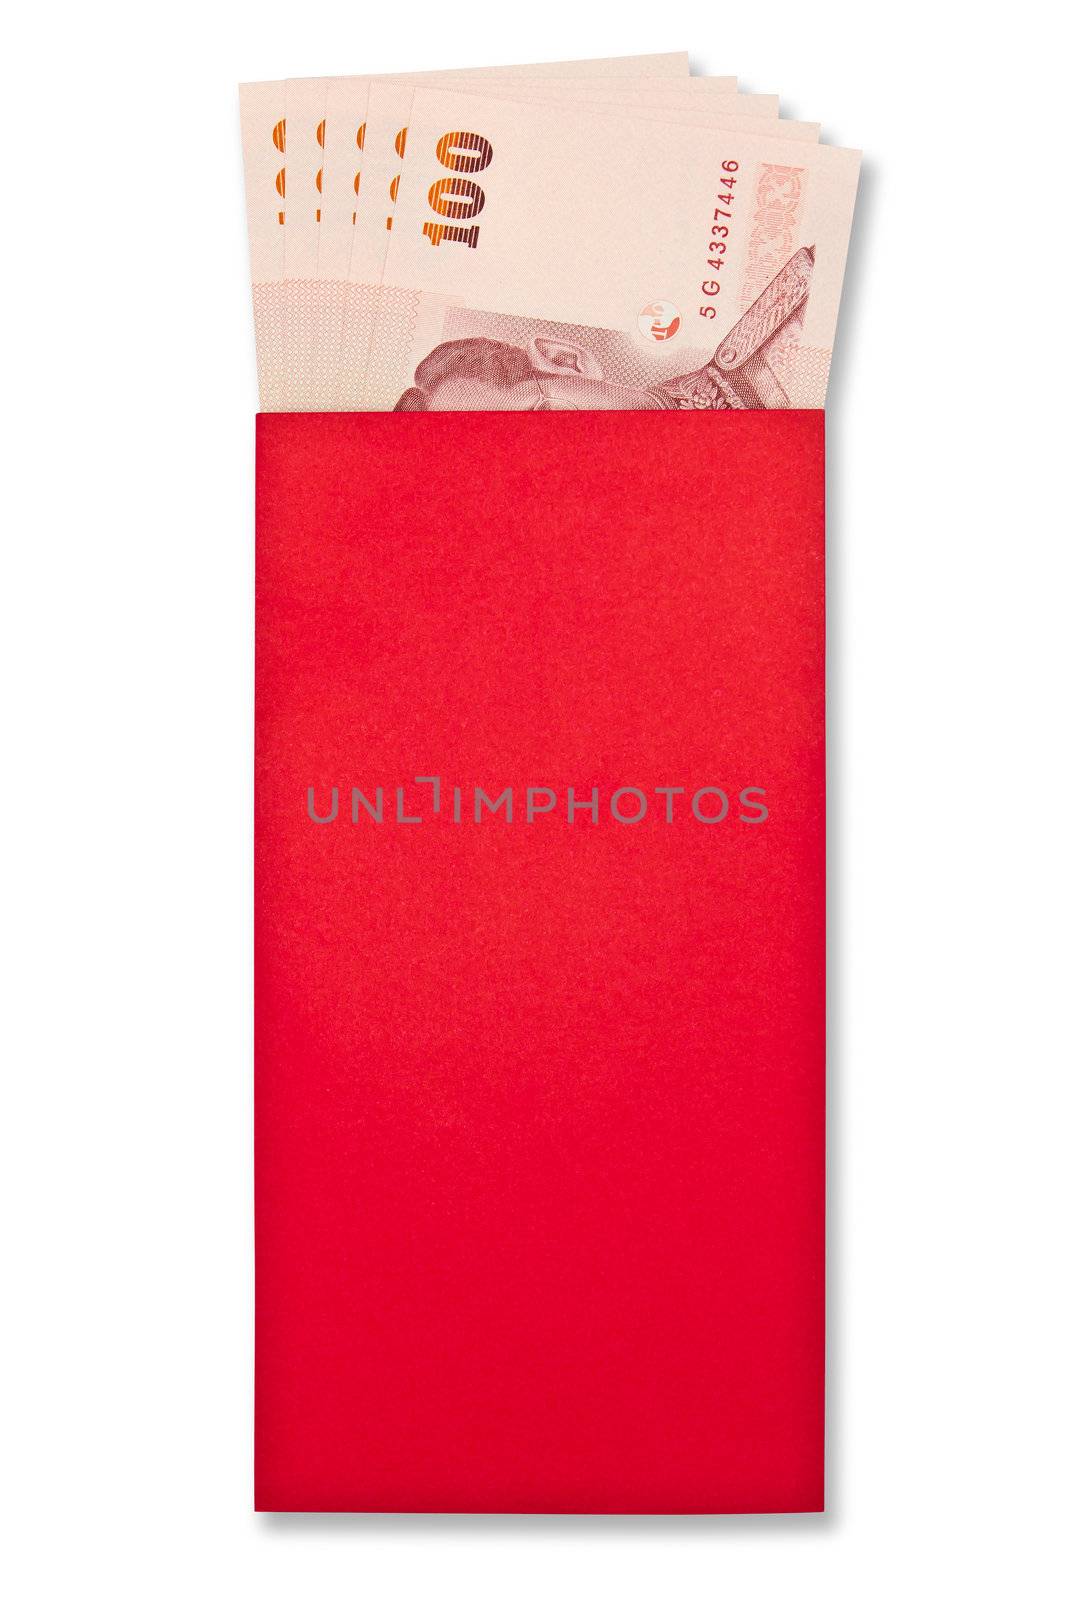 money in red envelope for give to people on chinese new year by tungphoto